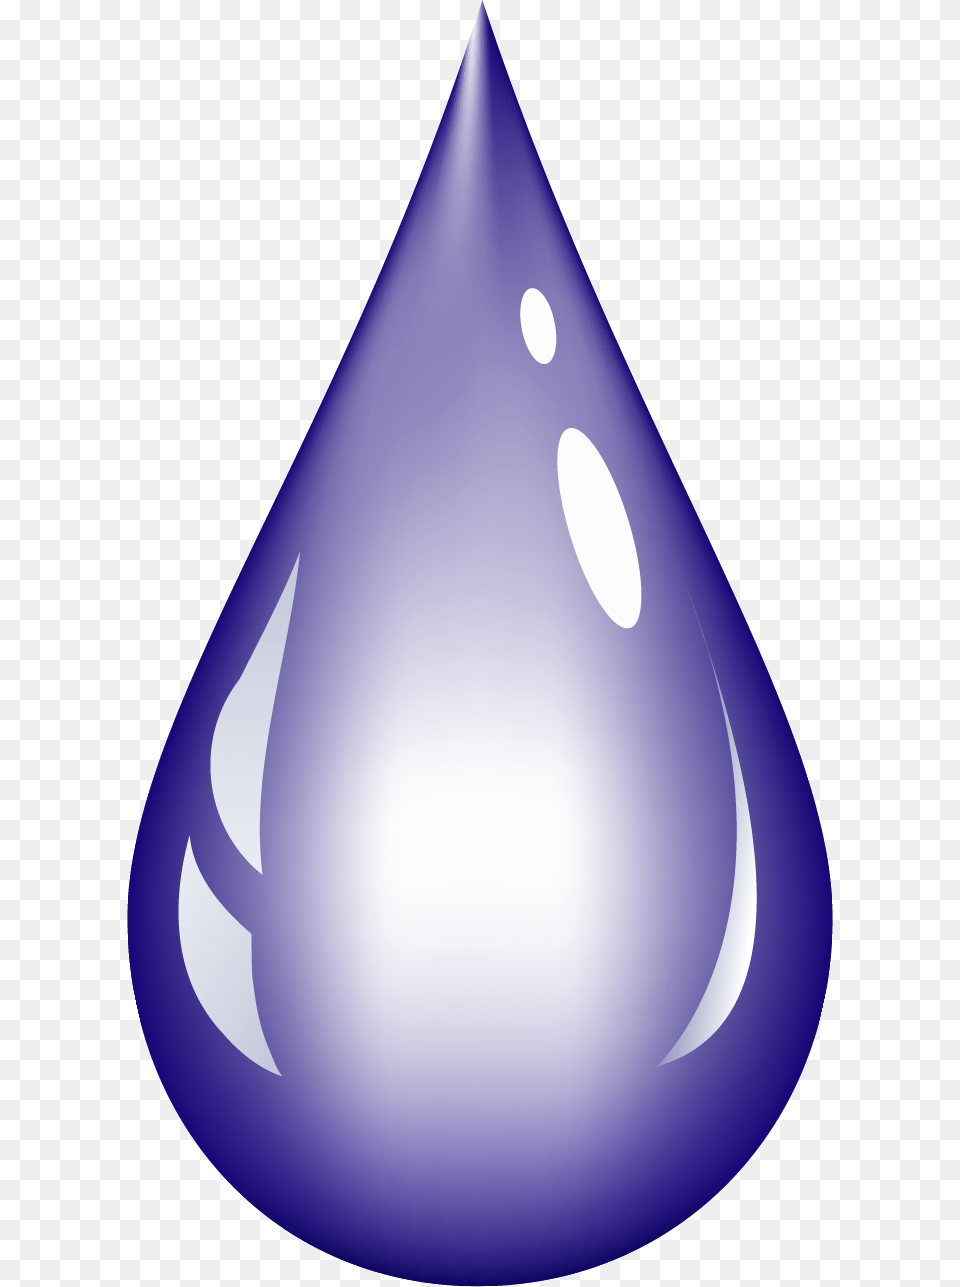 Lavender With Drop, Droplet, Lighting, Astronomy, Moon Free Transparent Png